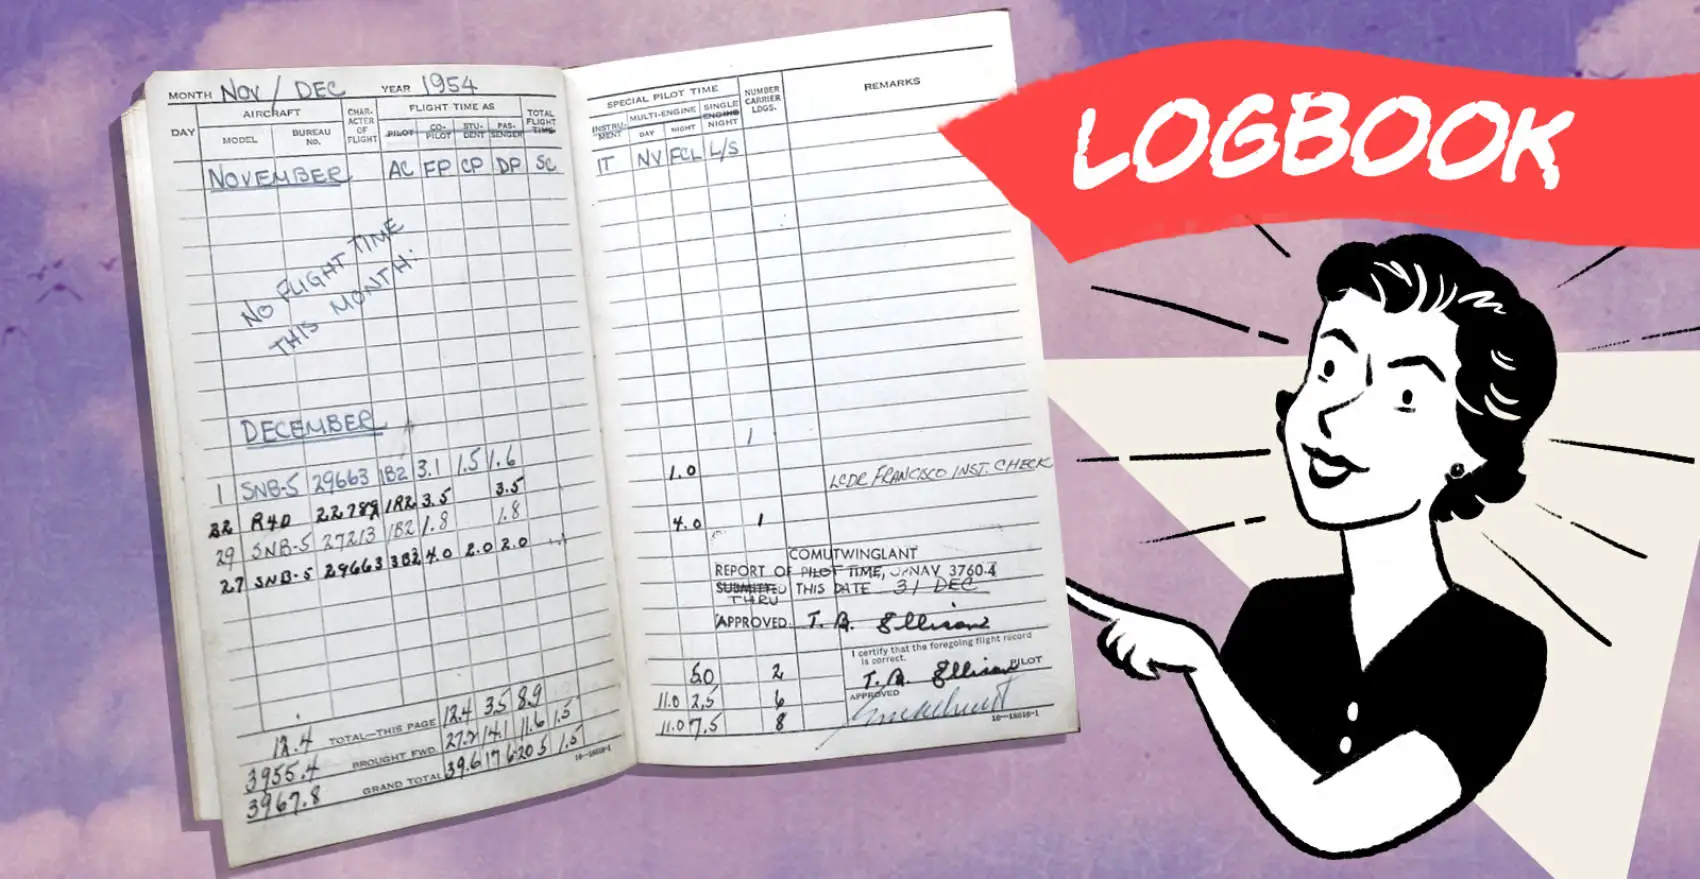 A 1950s style cartoon lady pointing at a vintage flight logbook